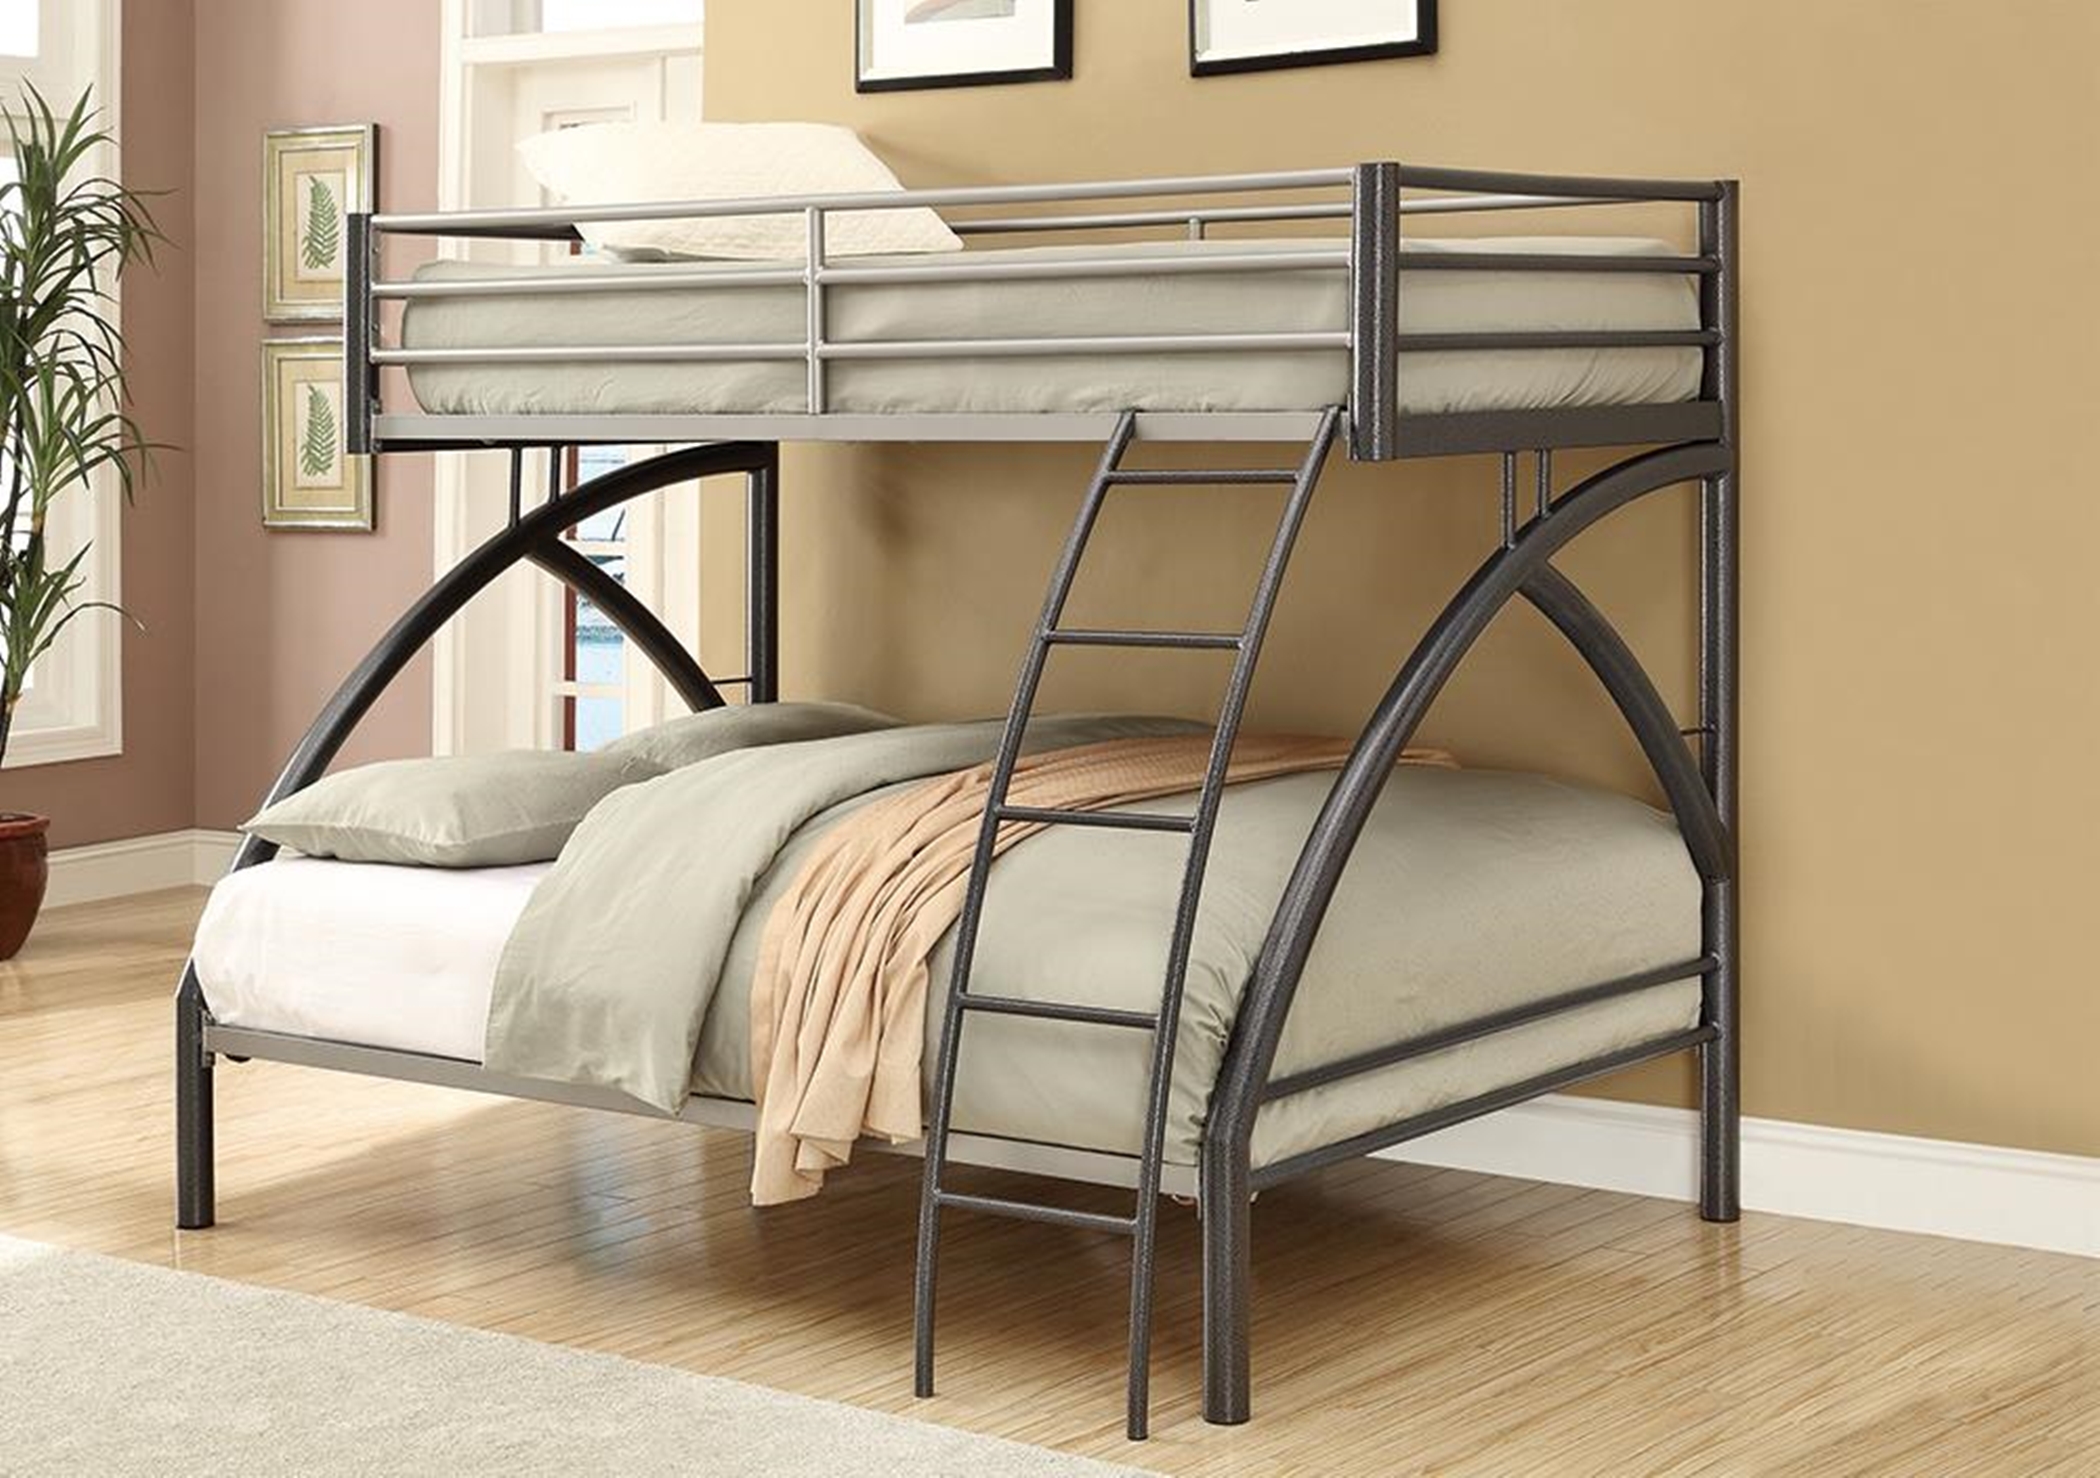 Twin-over-Full Metal Bunk Bed - Click Image to Close